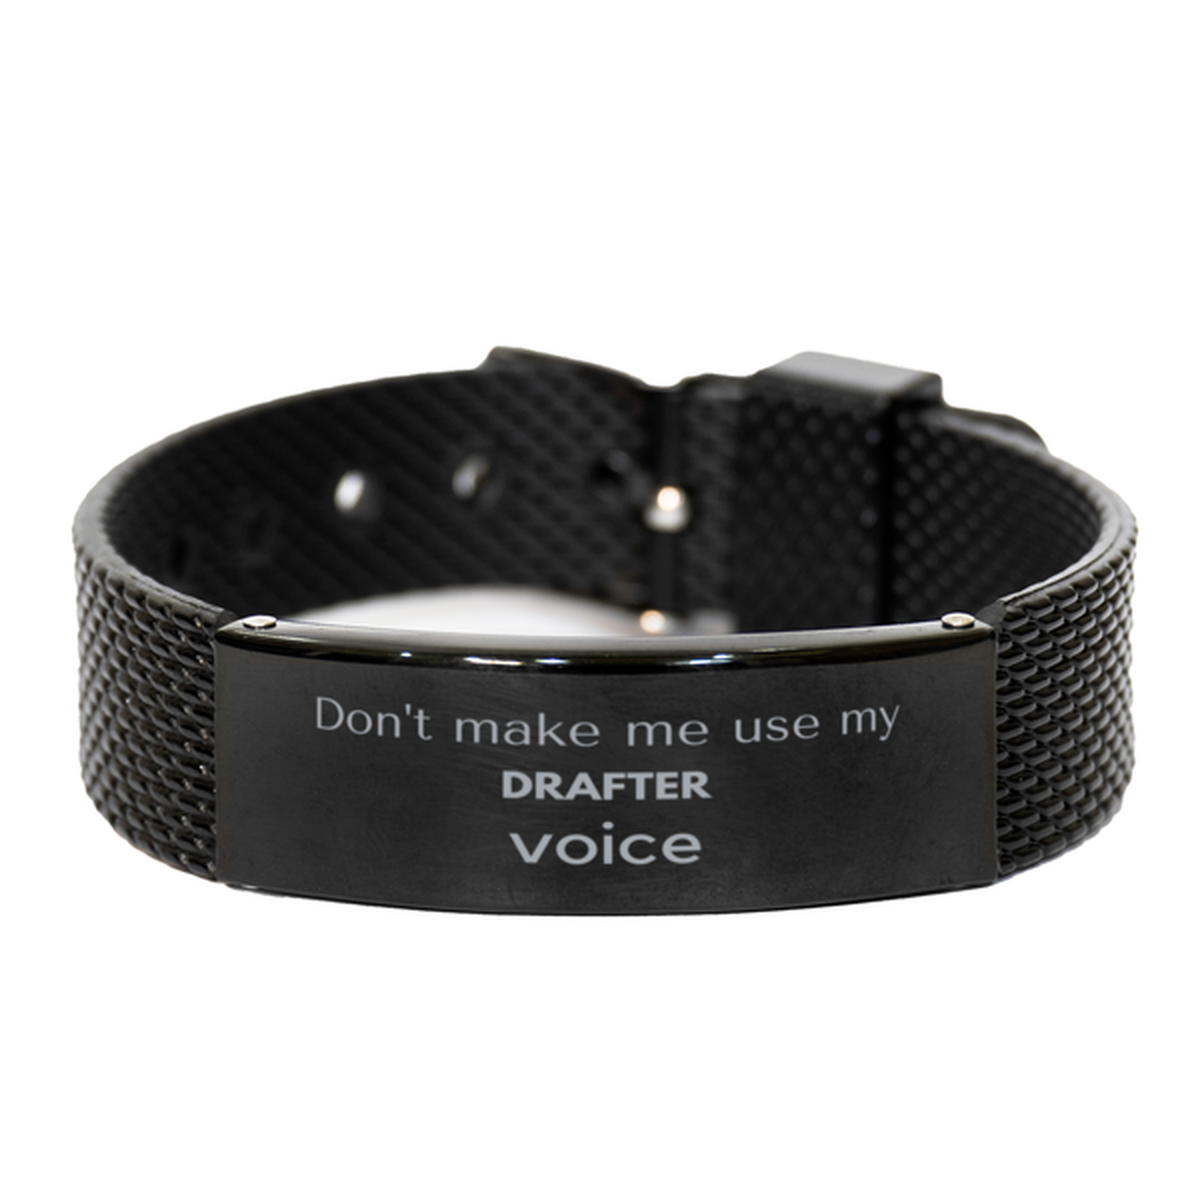 Don't make me use my Drafter voice, Sarcasm Drafter Gifts, Christmas Drafter Black Shark Mesh Bracelet Birthday Unique Gifts For Drafter Coworkers, Men, Women, Colleague, Friends